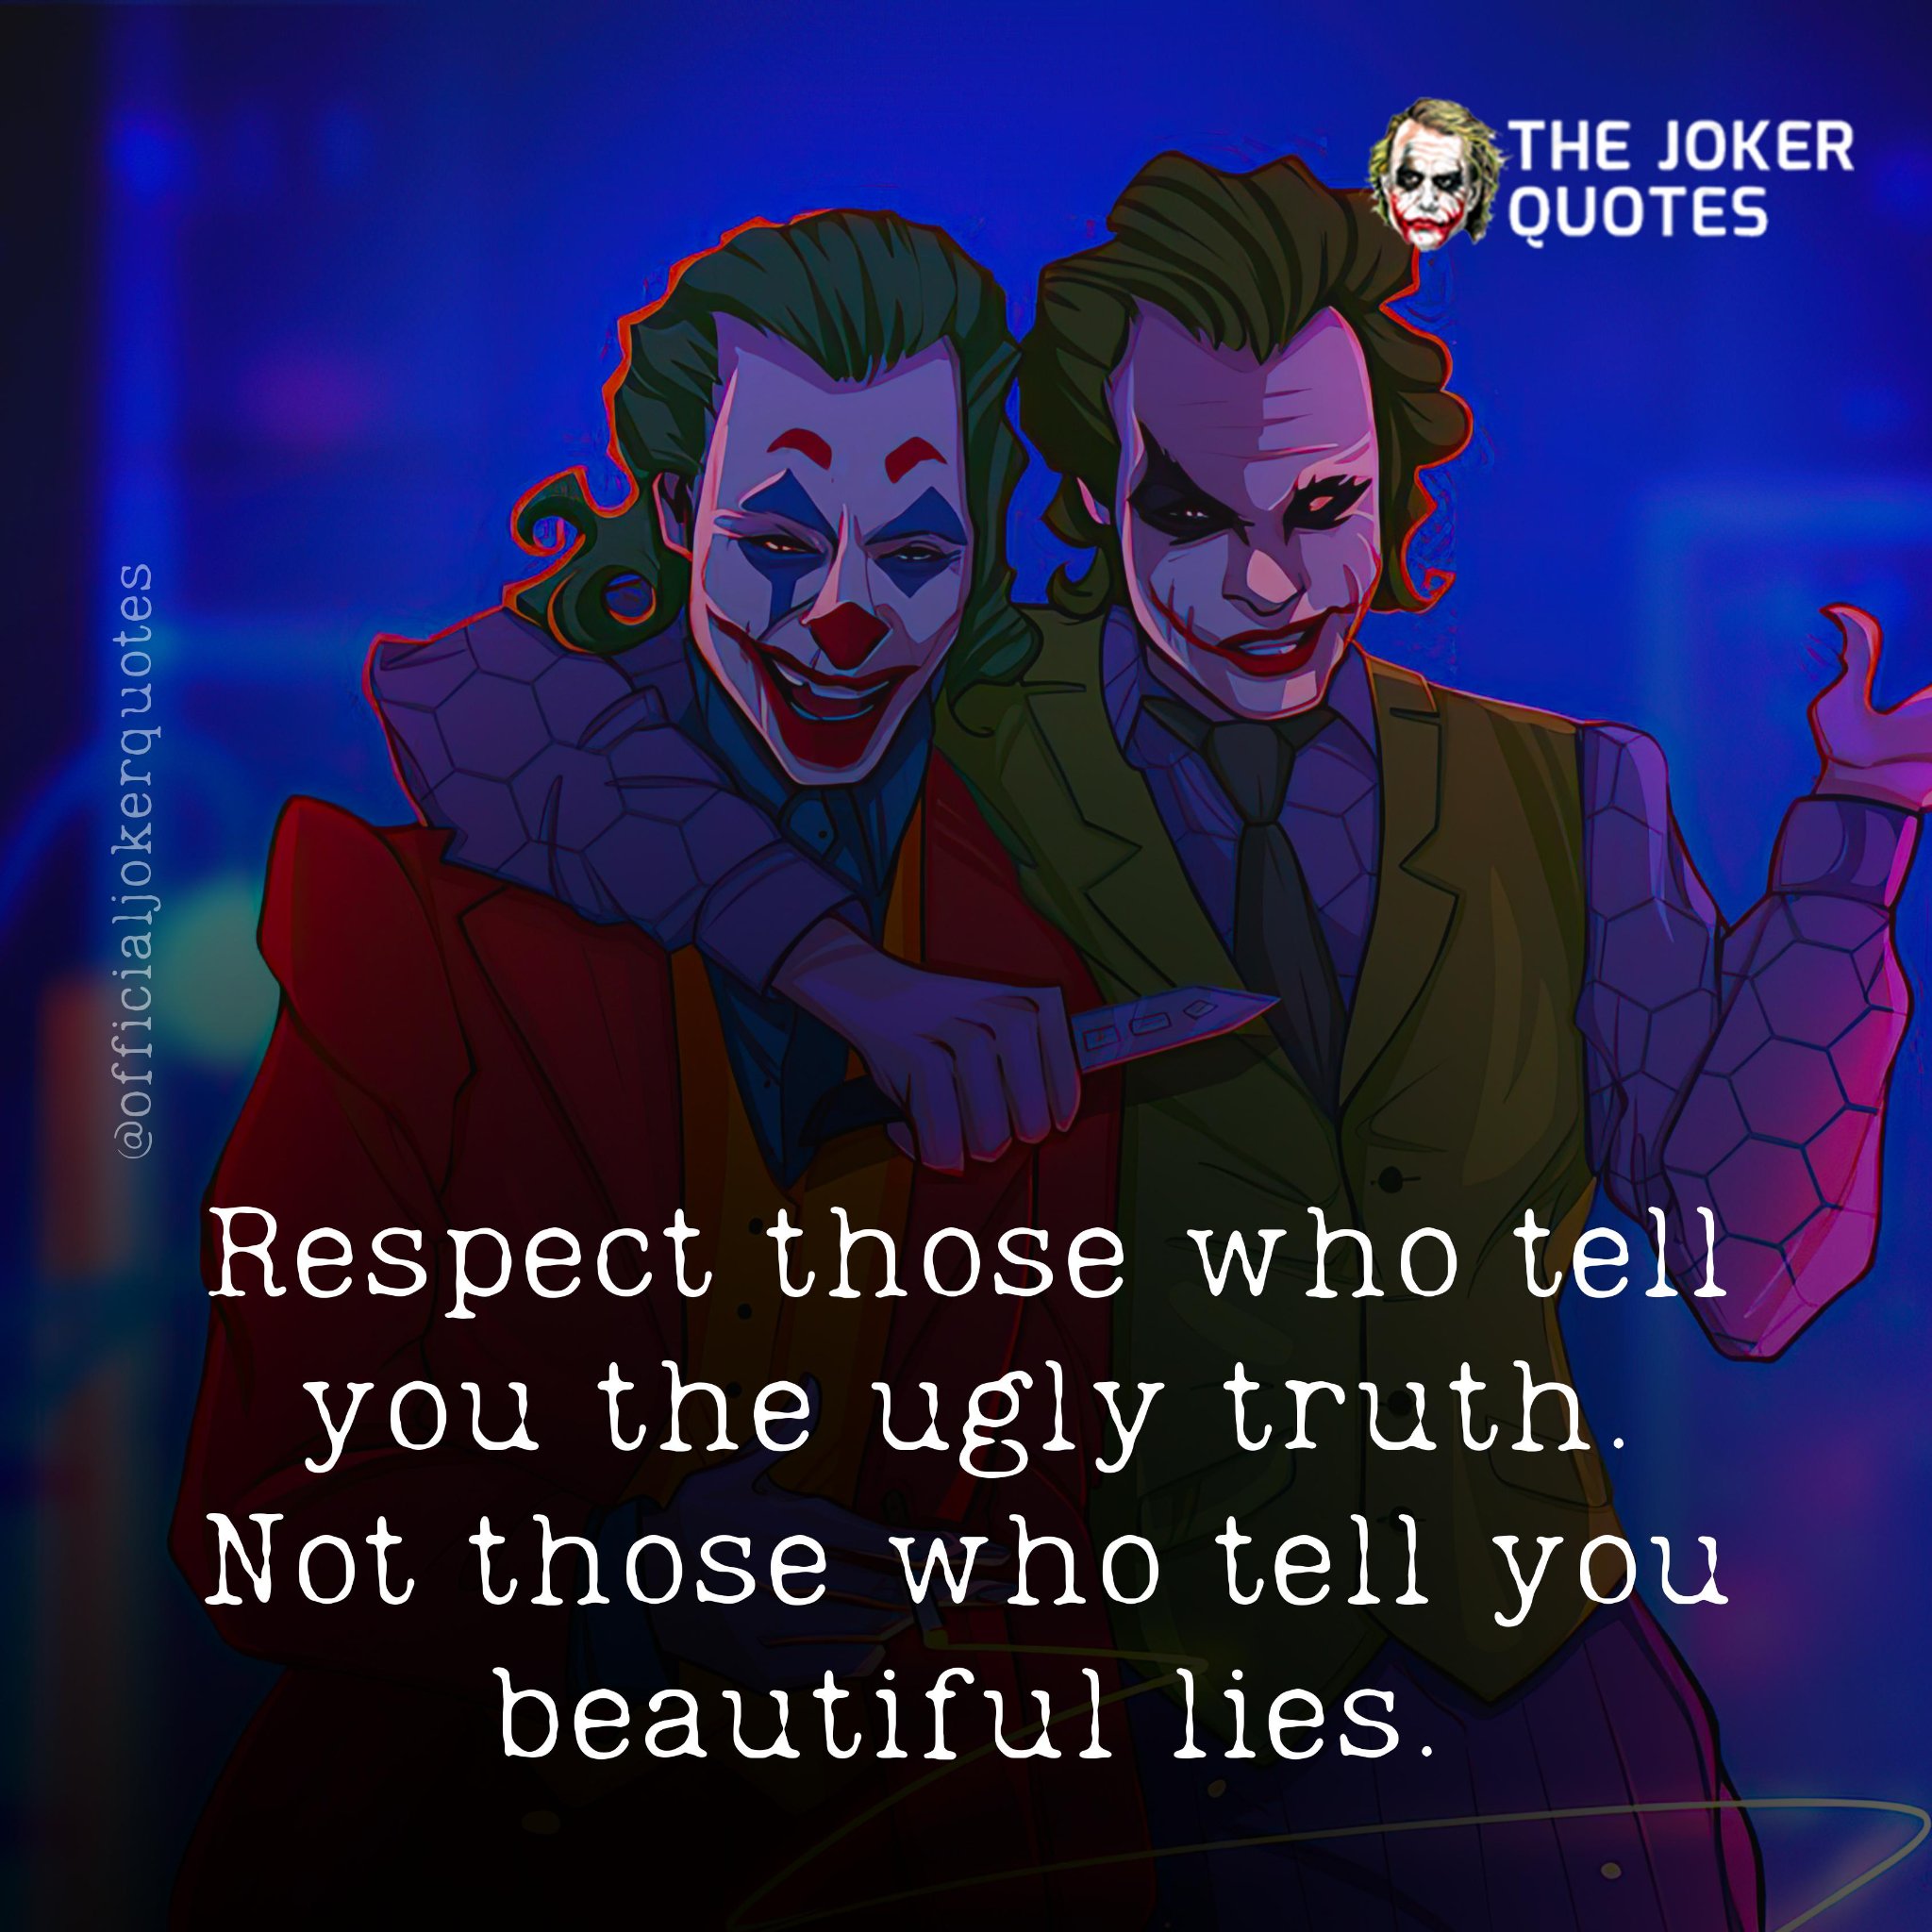 Respect those who tell you the ugly truth, not those who tell you beautiful lies